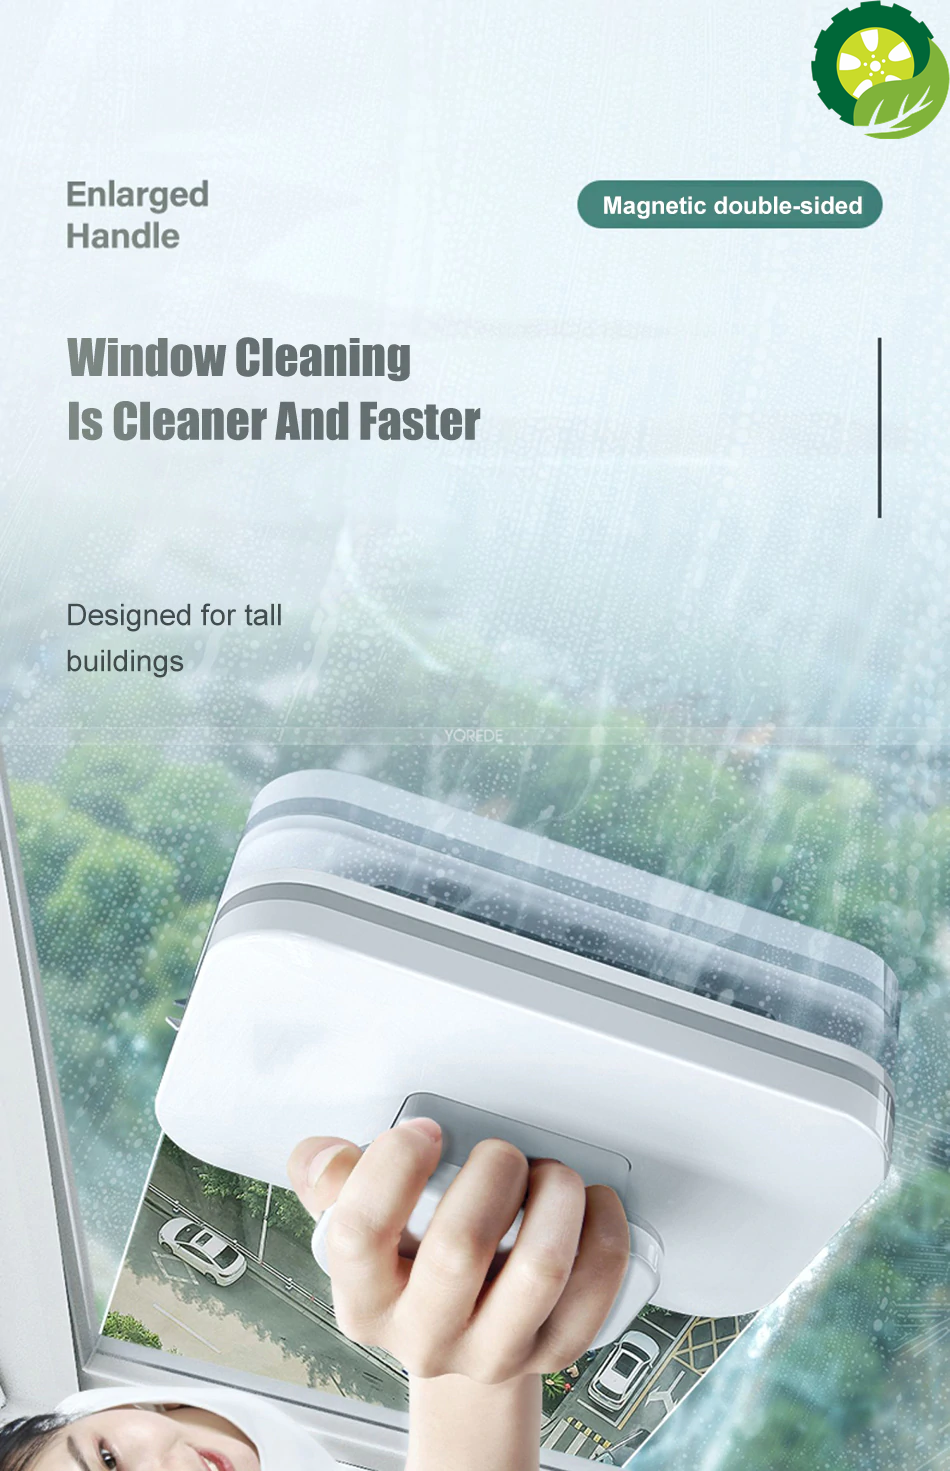 Magnetic Glass Wiper Wash Window Magnets Double Side Cleaning Brush Magnetic Brush For Washing Windows Home Cleaning Tool TIANTIAN LIFE Market Place